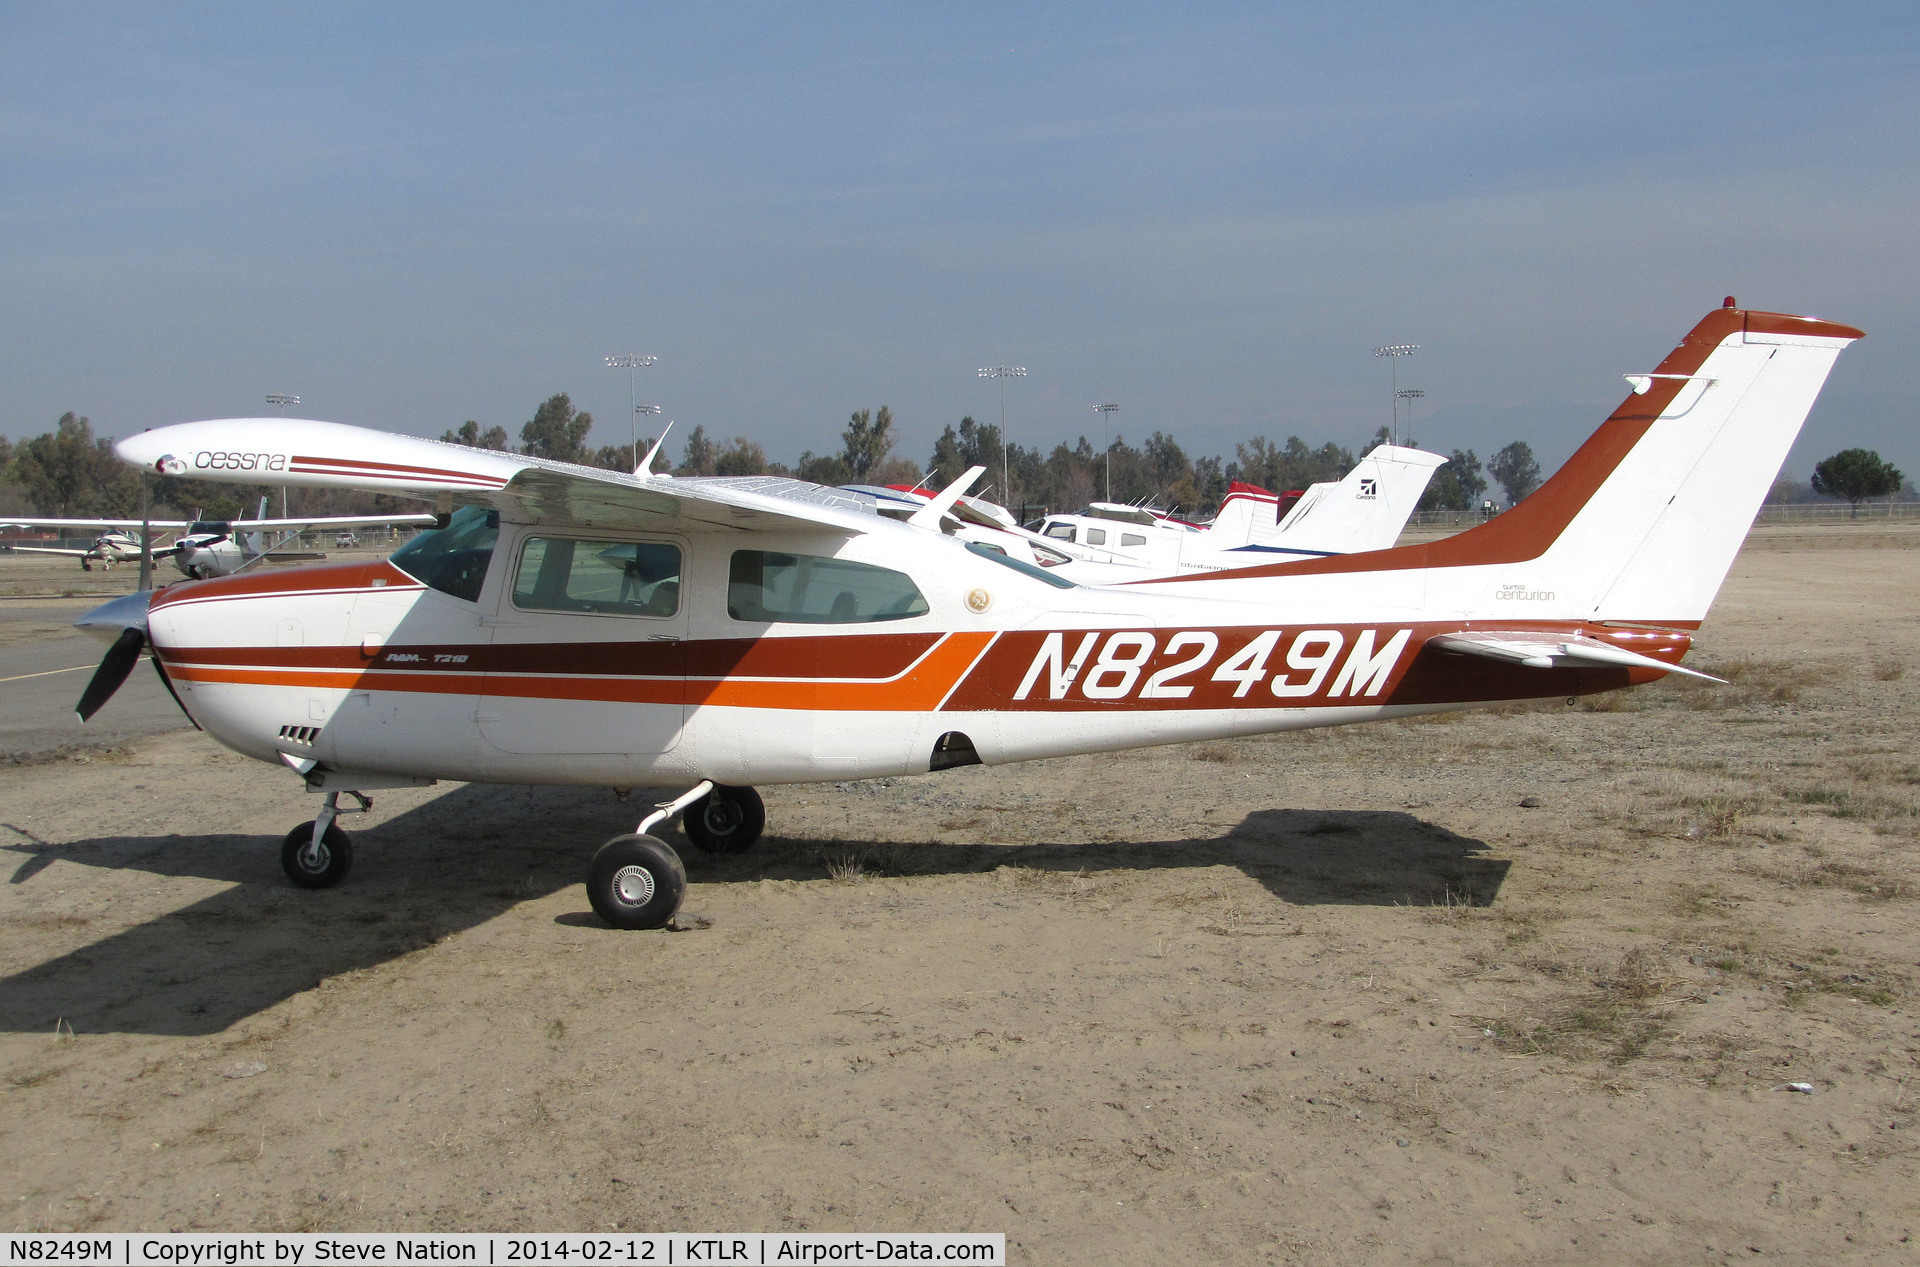 N8249M, 1977 Cessna T210M Turbo Centurion C/N 21062039, privately-owned Cessna T210M from Camarillo, CA @ Mefford Field (Tulare, CA) for 2014 International Ag Expo